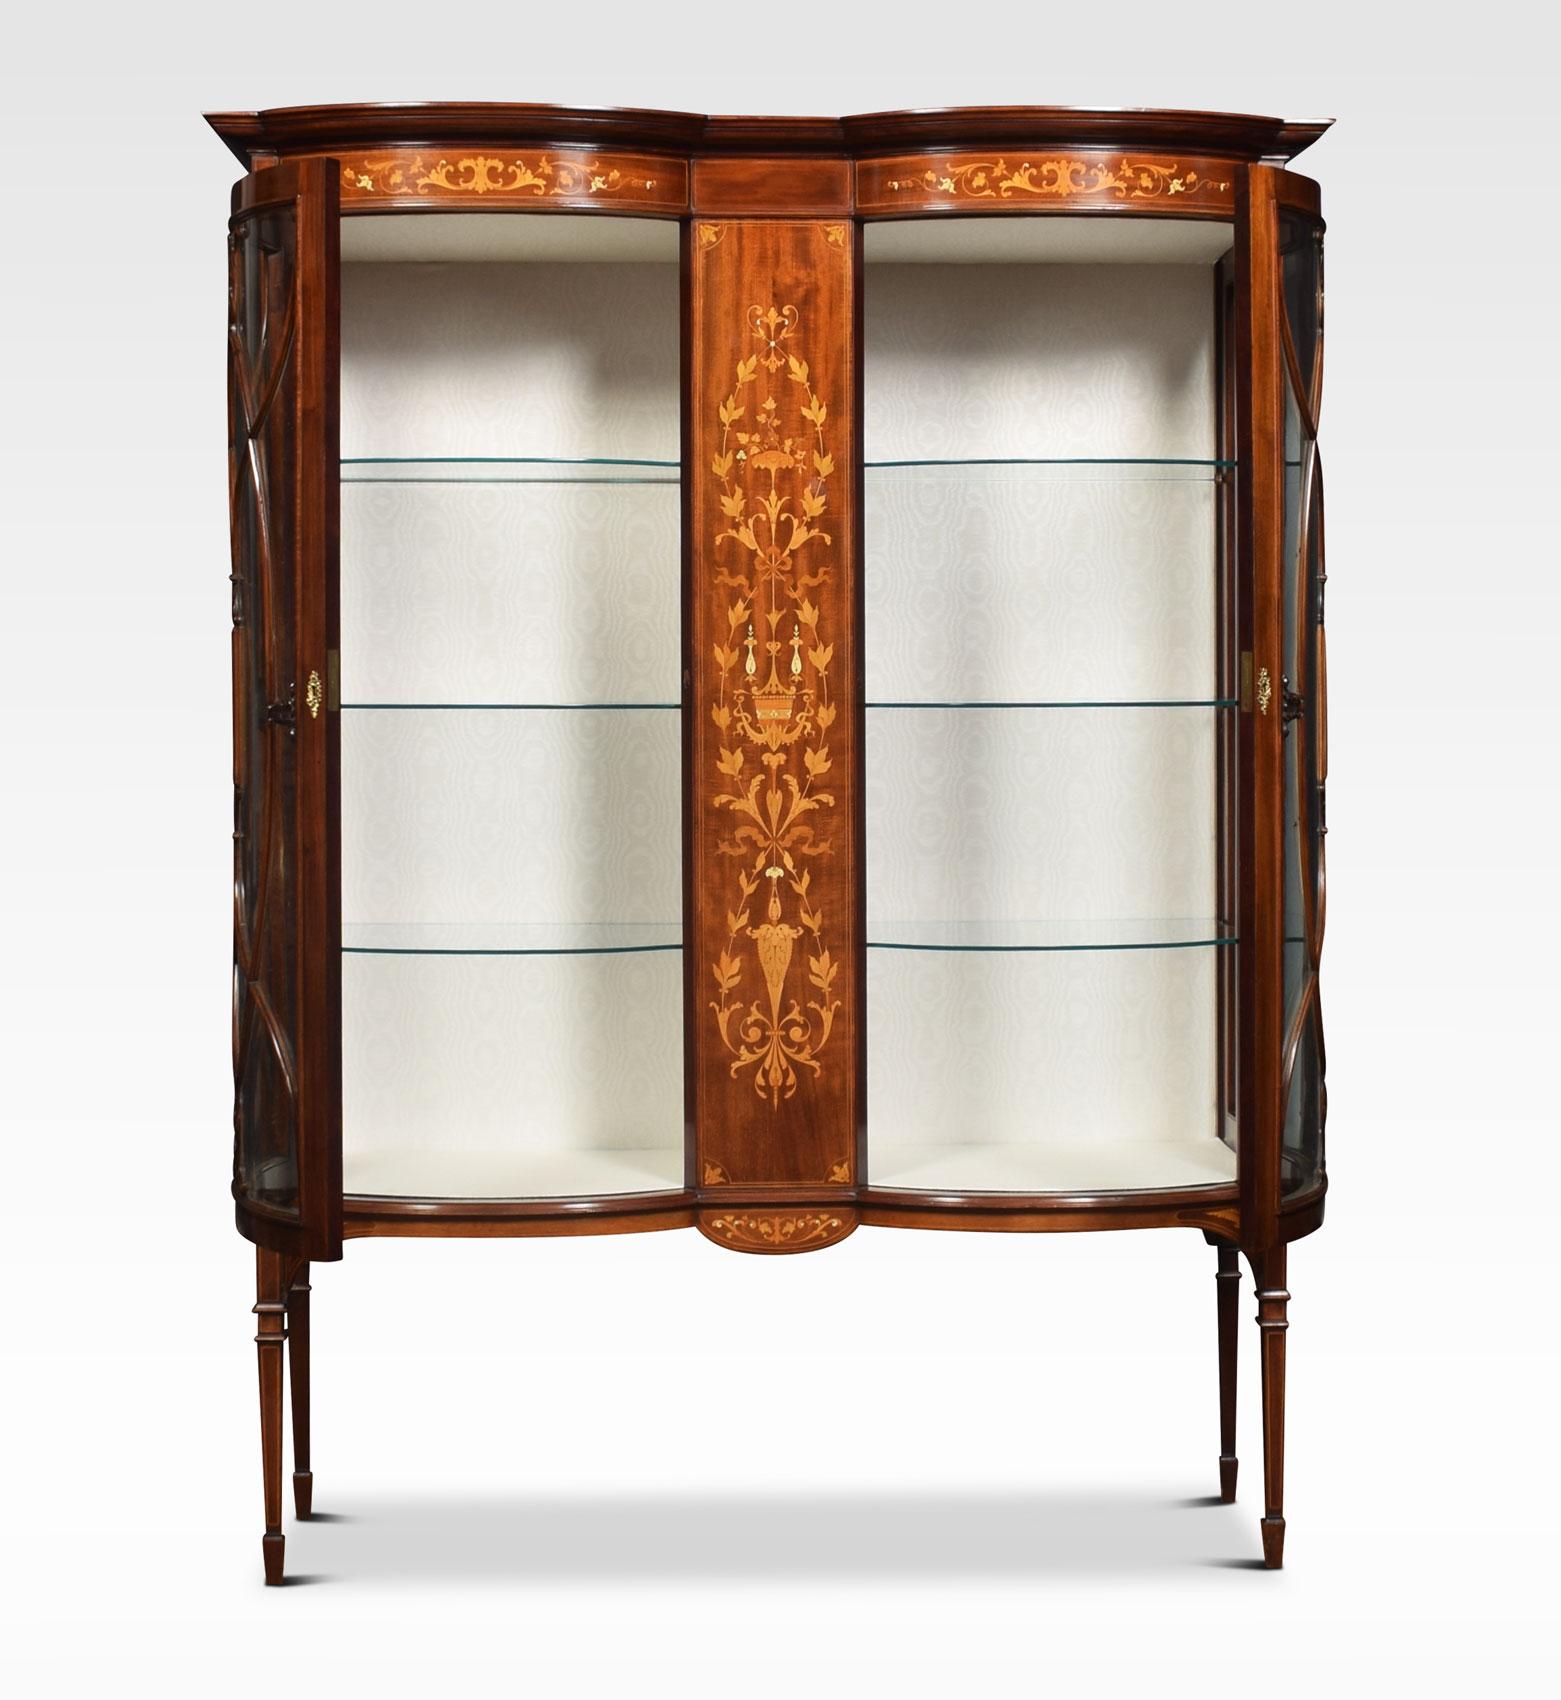 Mahogany display cabinet, having a double bow-fronted shaped top over central floral marquetry panel. Flanked by bowed glass doors enclosing three glass shelves to each side and watermark silk upholstery. All raised up on tapering legs terminating